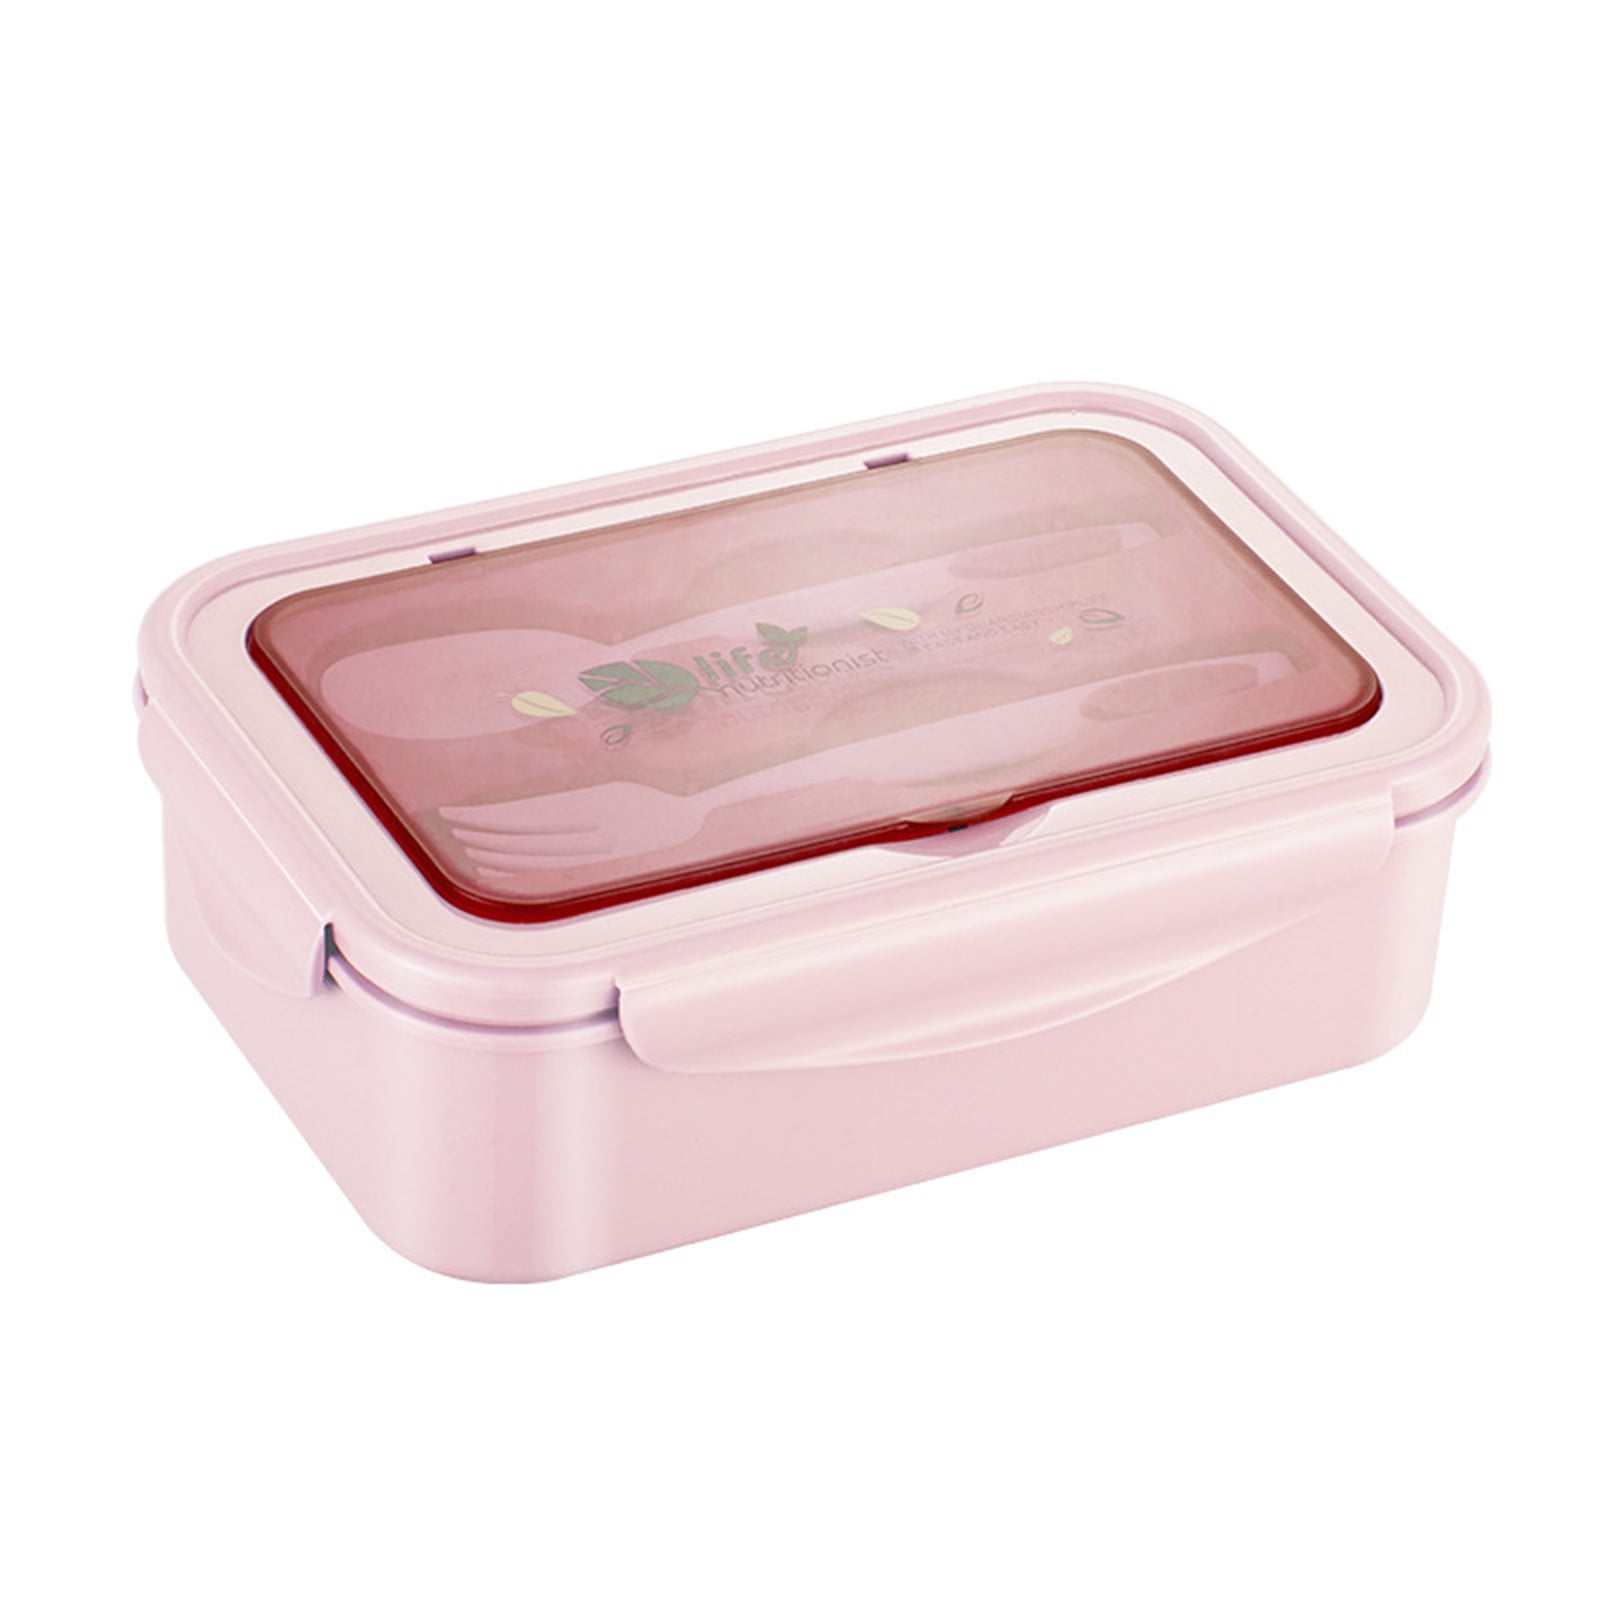 XMMSWDLA Luncheaze Lunch Box Pink Lunch Boxbento Boxes for Adults